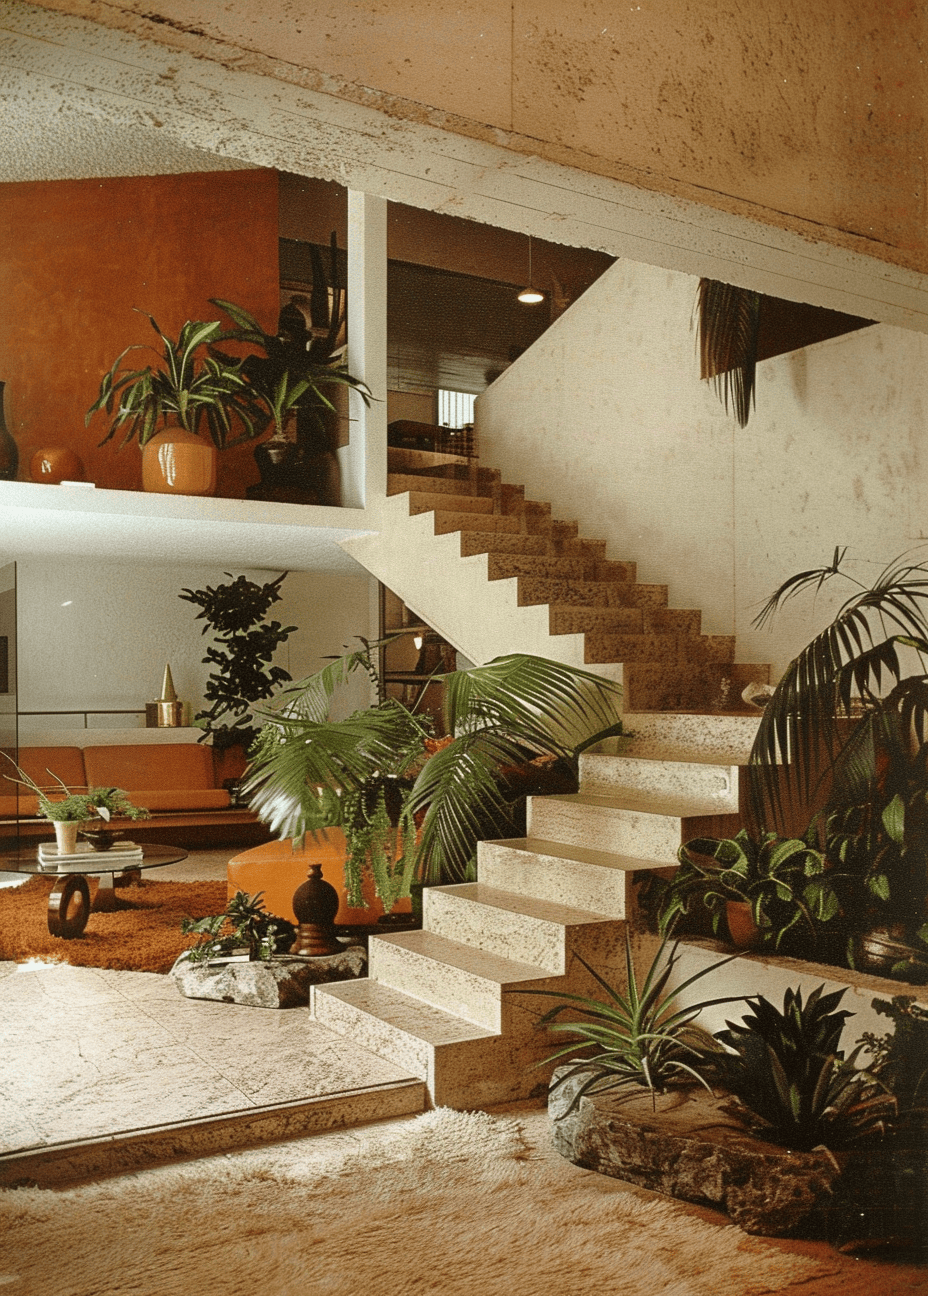 Hallway design ideas for retro enthusiasts with a passion for the 70s